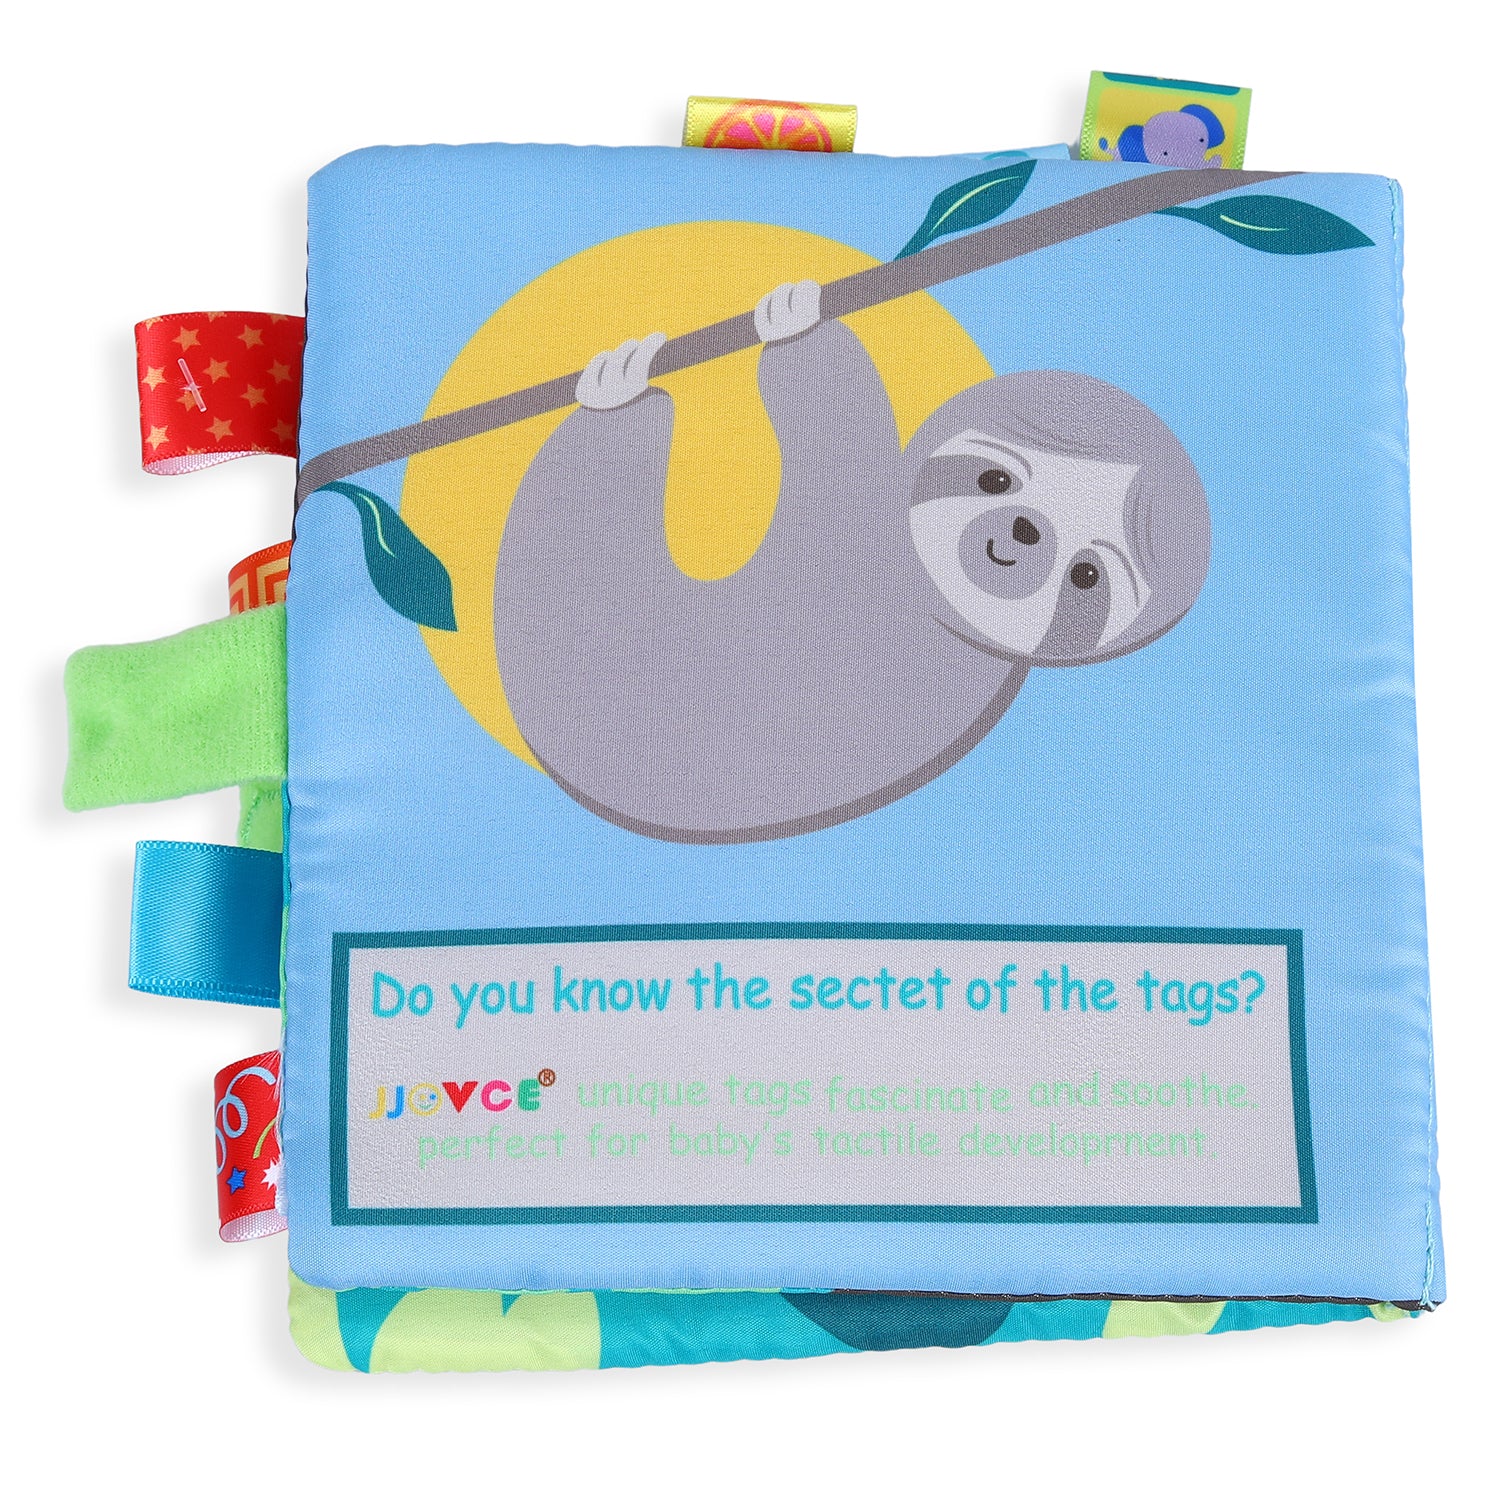 Sloth, Hurry Up! Educational Learning 3D Cloth Book With Rustle Paper - Multicolour - Baby Moo